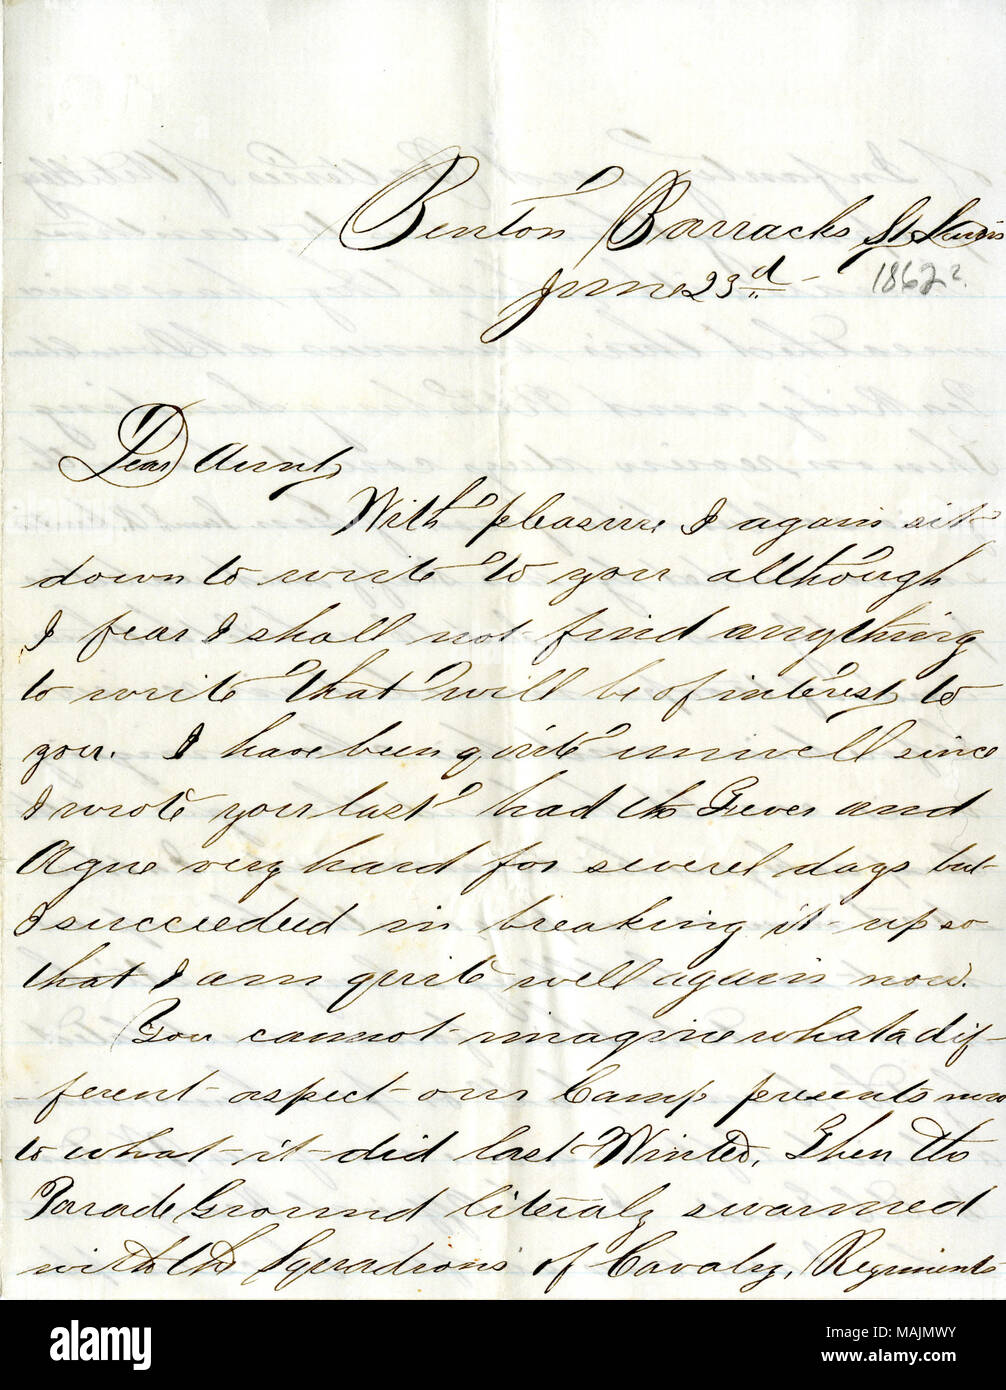 Describes affairs at Benton Barracks, including a visit of General Samuel R. Curtis. Includes a poem.  Benton Barracks St Louis June 23d Dear Aunt, With pleasure I again sit down to write you although I fear I shall not find anything to write that will be of interest to you. I have been quite unwell since I wrote you last had the Fever and Ague very hard for several days but I succeedeed in breaking it up so that I am quite well again now. You cannot imagine what a different aspect our Camp presents now to what it did last Winter. Then the Parade Ground literaly swarmed with the Squadrons of C Stock Photo